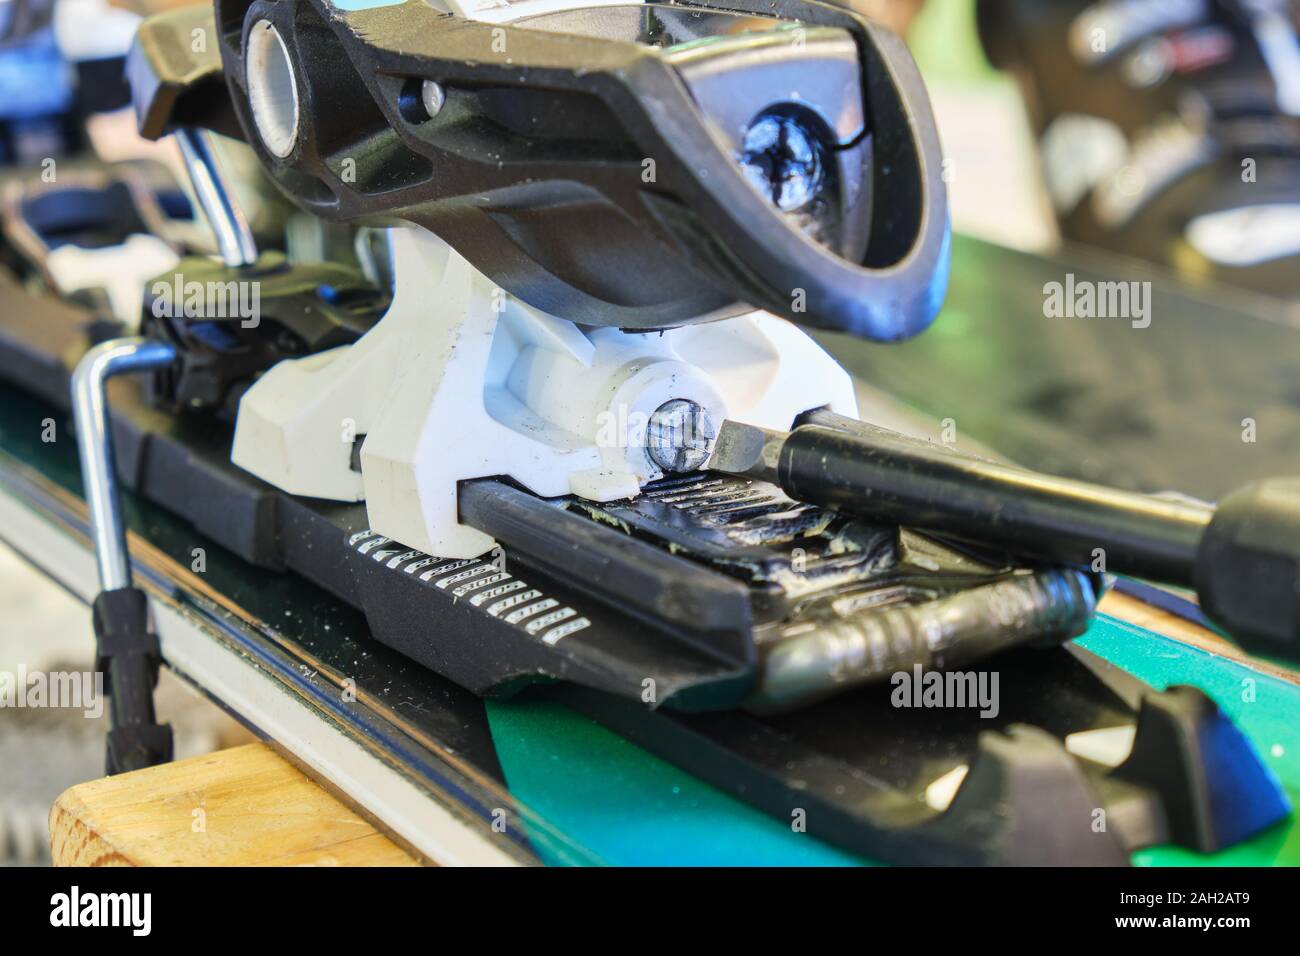 Screw for adjusting forward pressure in a ski binding using a screwdriver,  after clipping the ski boot in first Stock Photo - Alamy